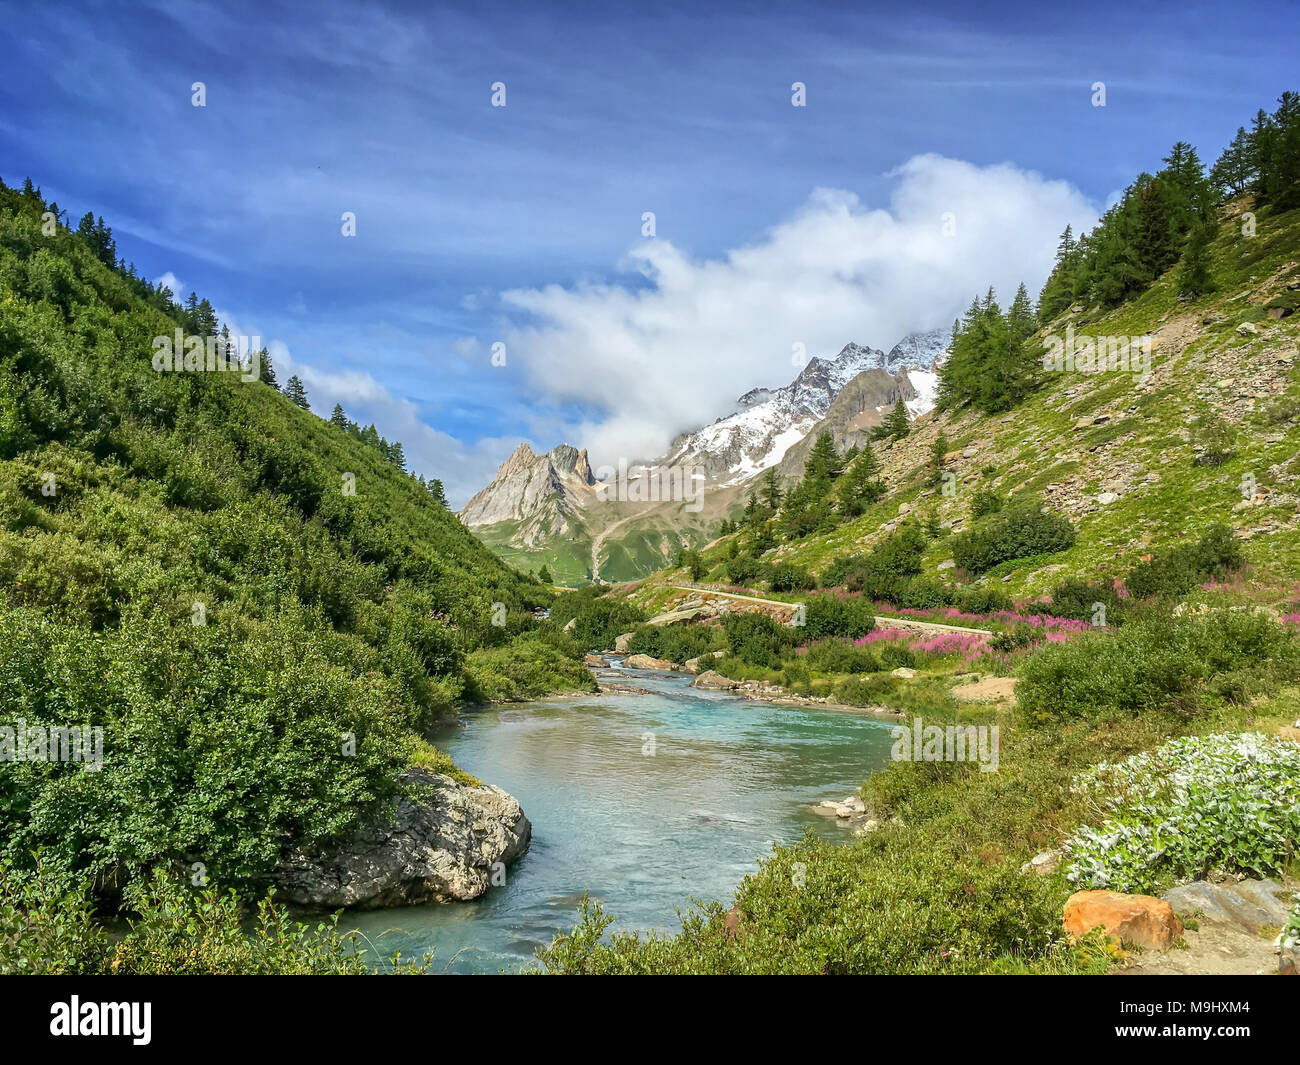 Torrent landscape during Tour du Mont Blanc hike, Aosta Valley, Italy Stock Photo